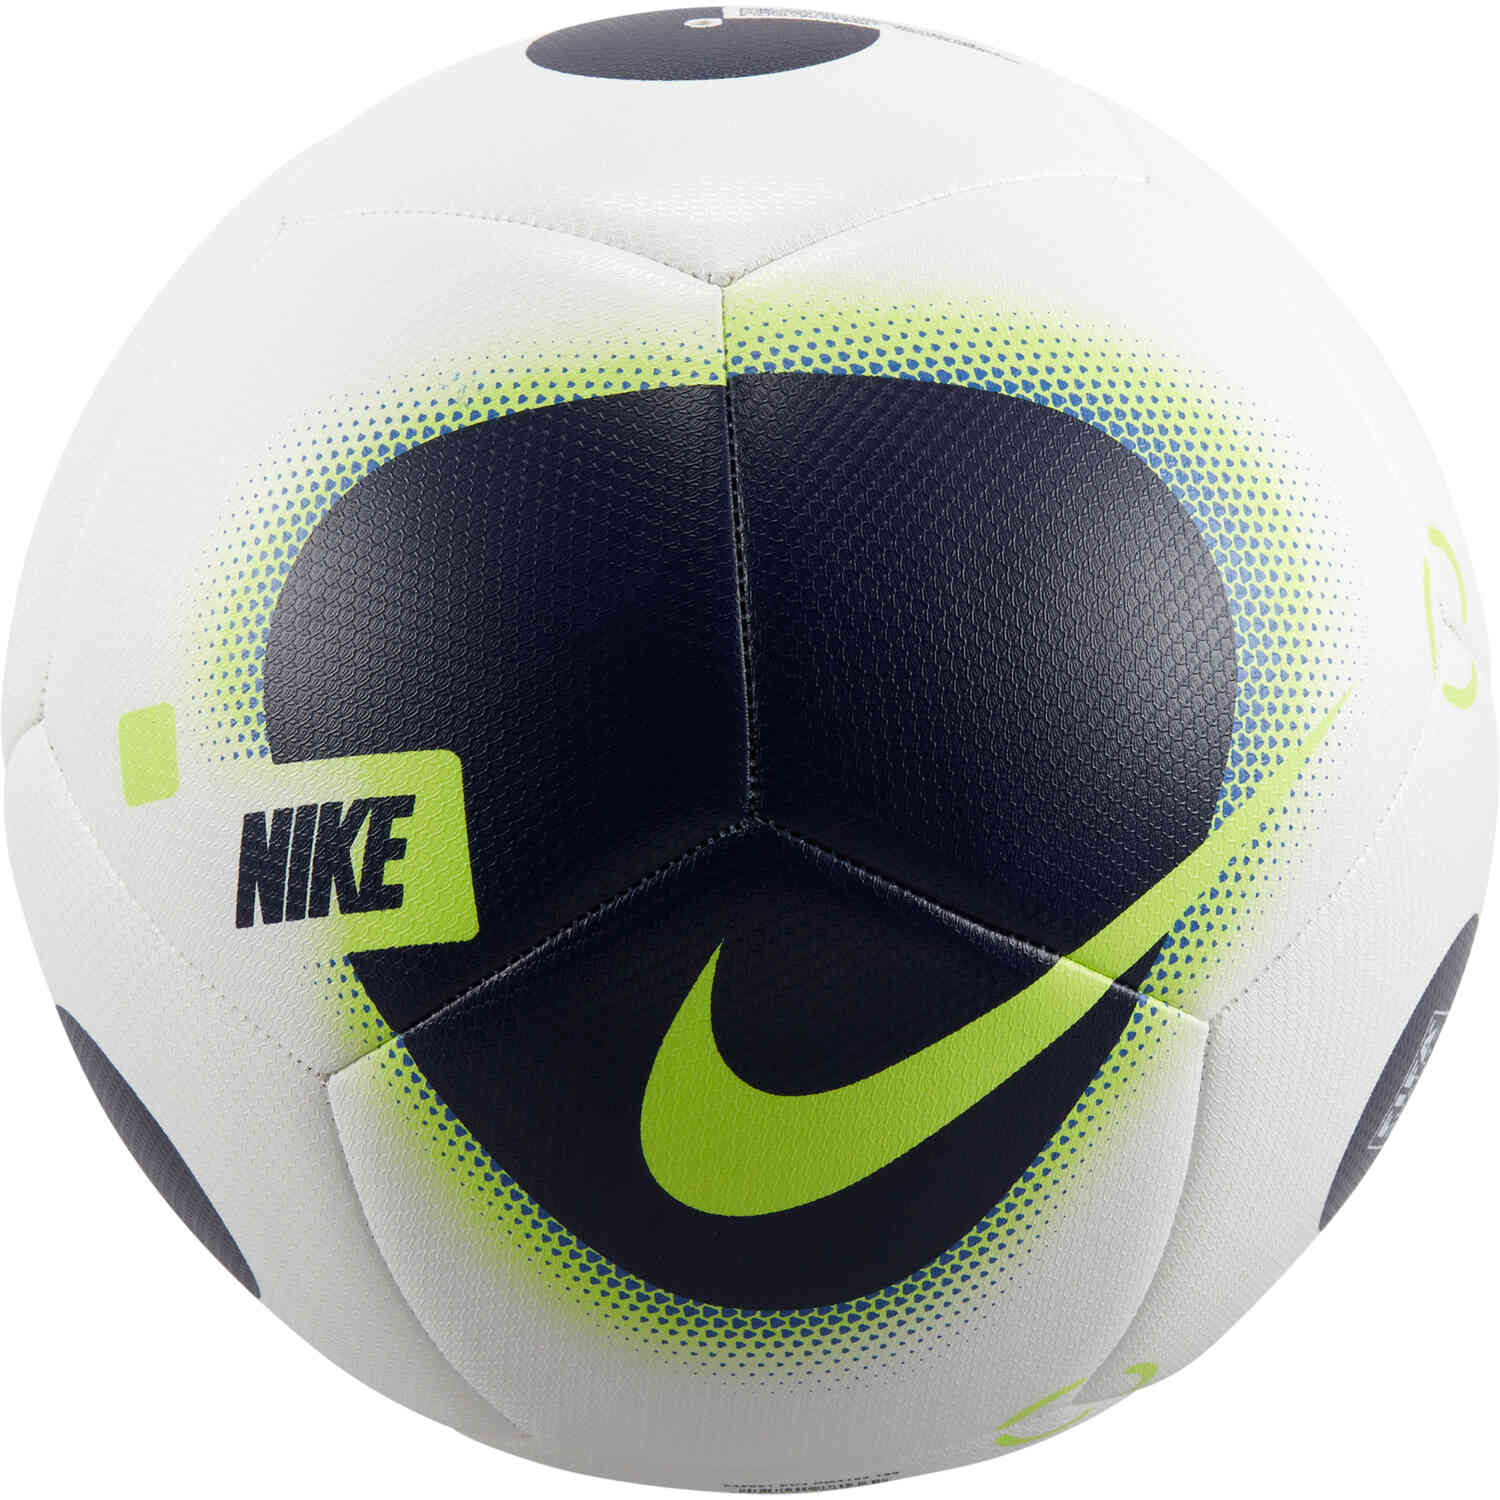 smuggling circuit gasoline Nike Pro Match Futsal Ball - White & Blue Void with Volt - SoccerPro